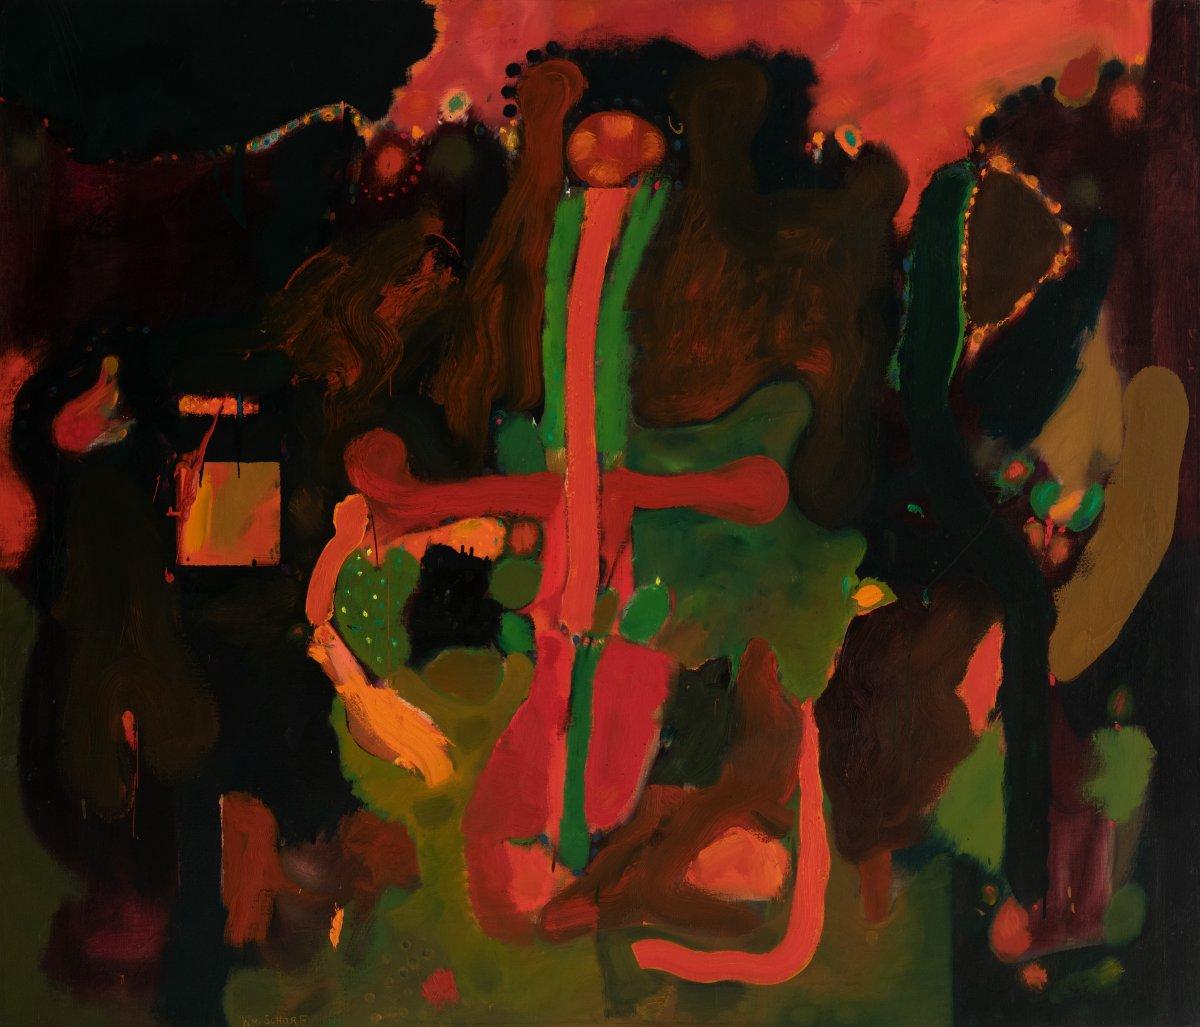 William Scharf
Tropic of Crucifix, 1957
Signed and dated on the reverse
Oil on canvas
40 x 47 inches

Provenance:
The artist
Robert Barnet, New York (gift from the above)
Private Collection, by descent

A visionary painter with ties to the